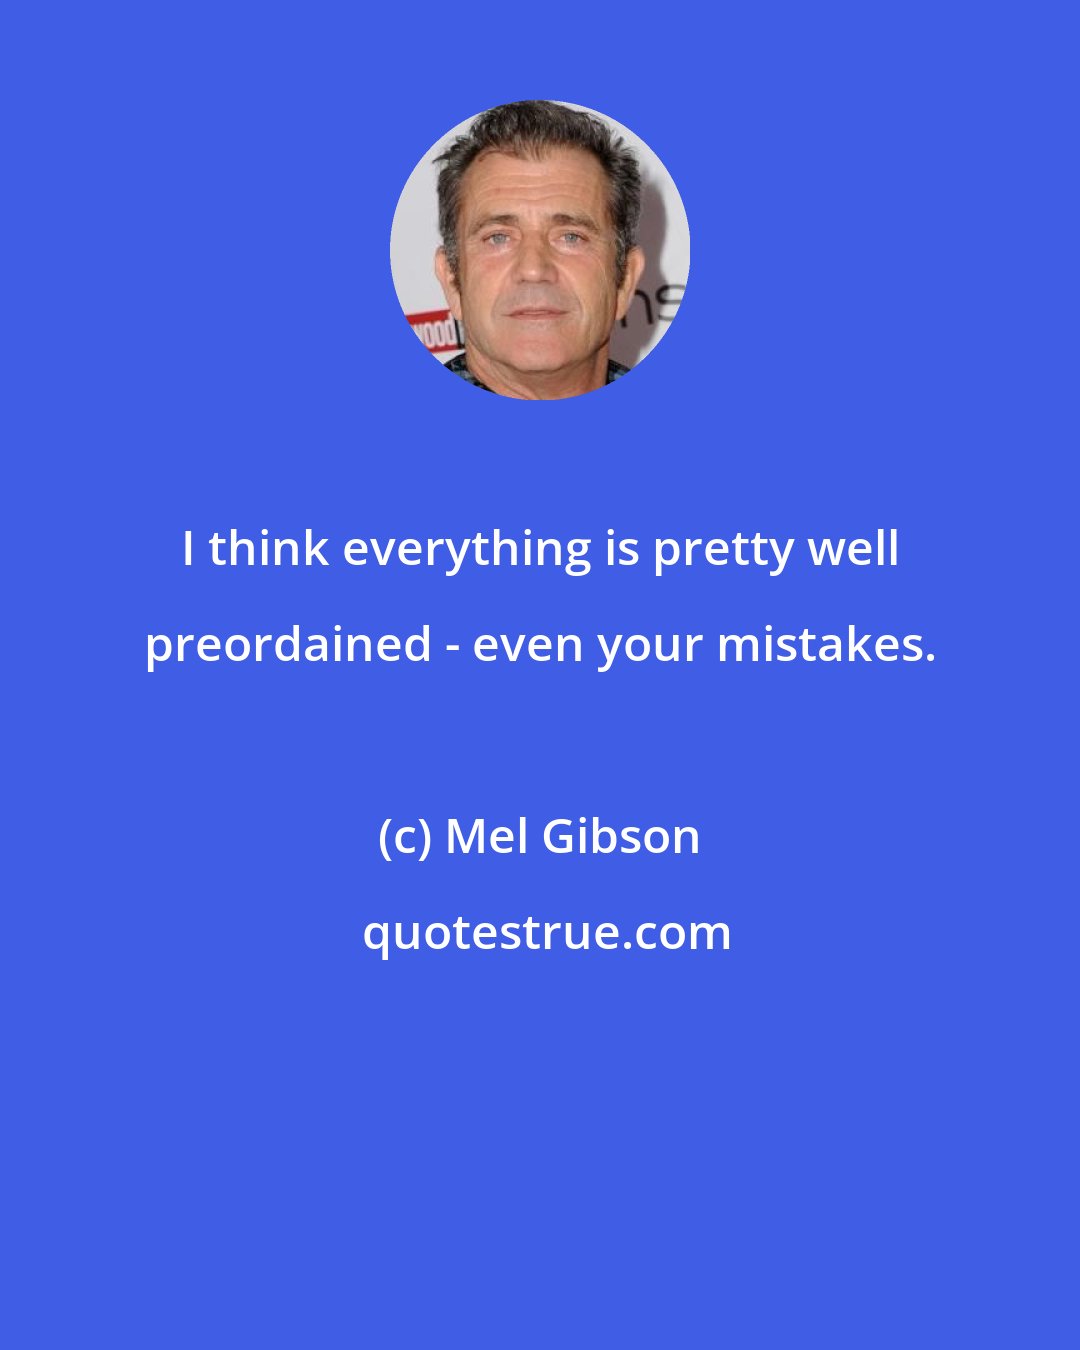 Mel Gibson: I think everything is pretty well preordained - even your mistakes.